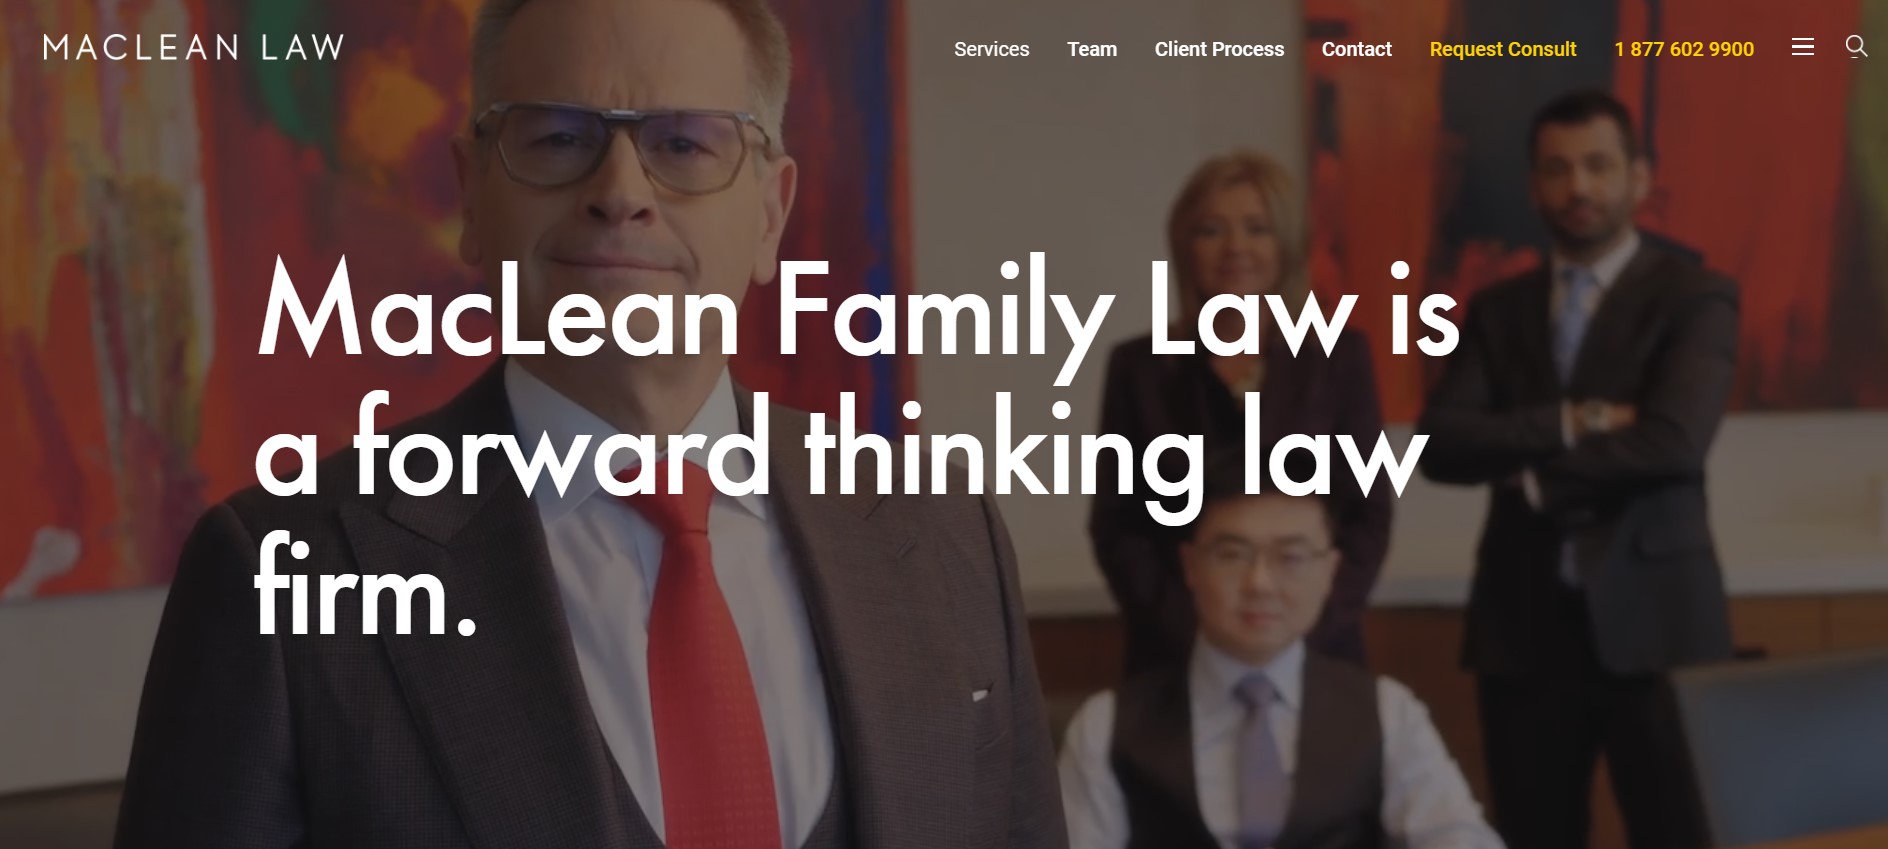 maclean family attorney in calgary